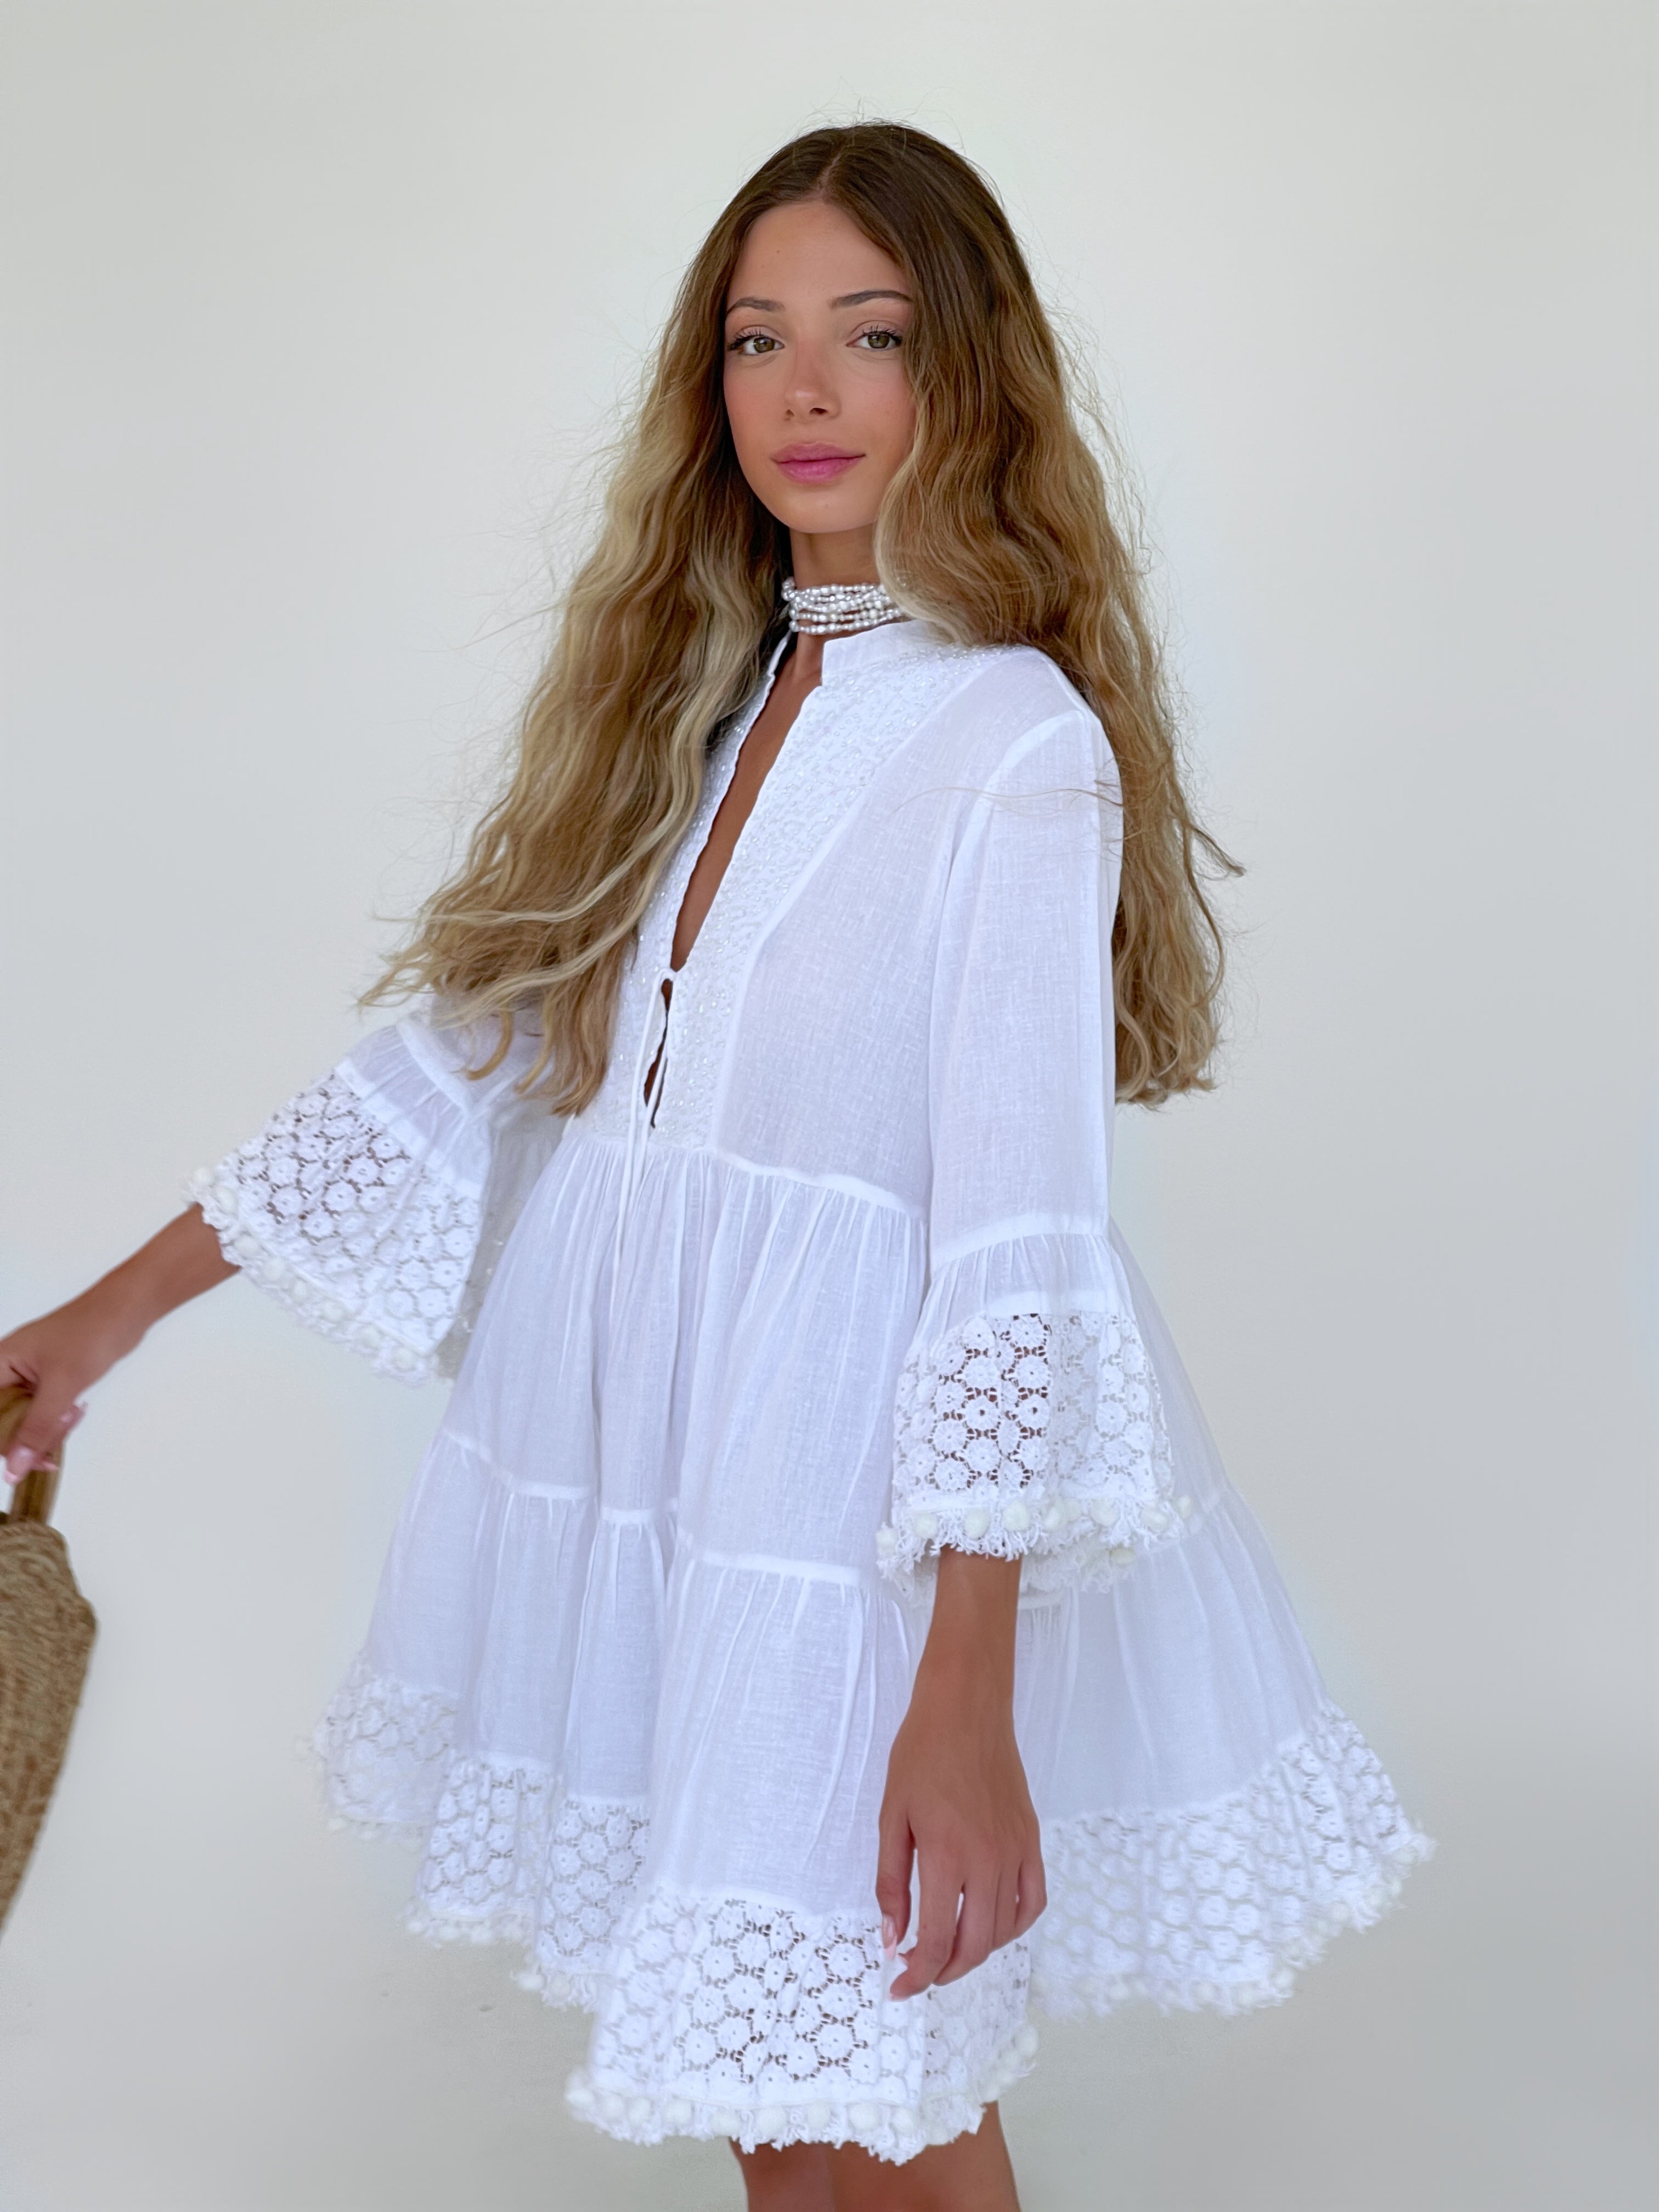 WHITE DRESS WITH LACE AND BEADS DETAILS